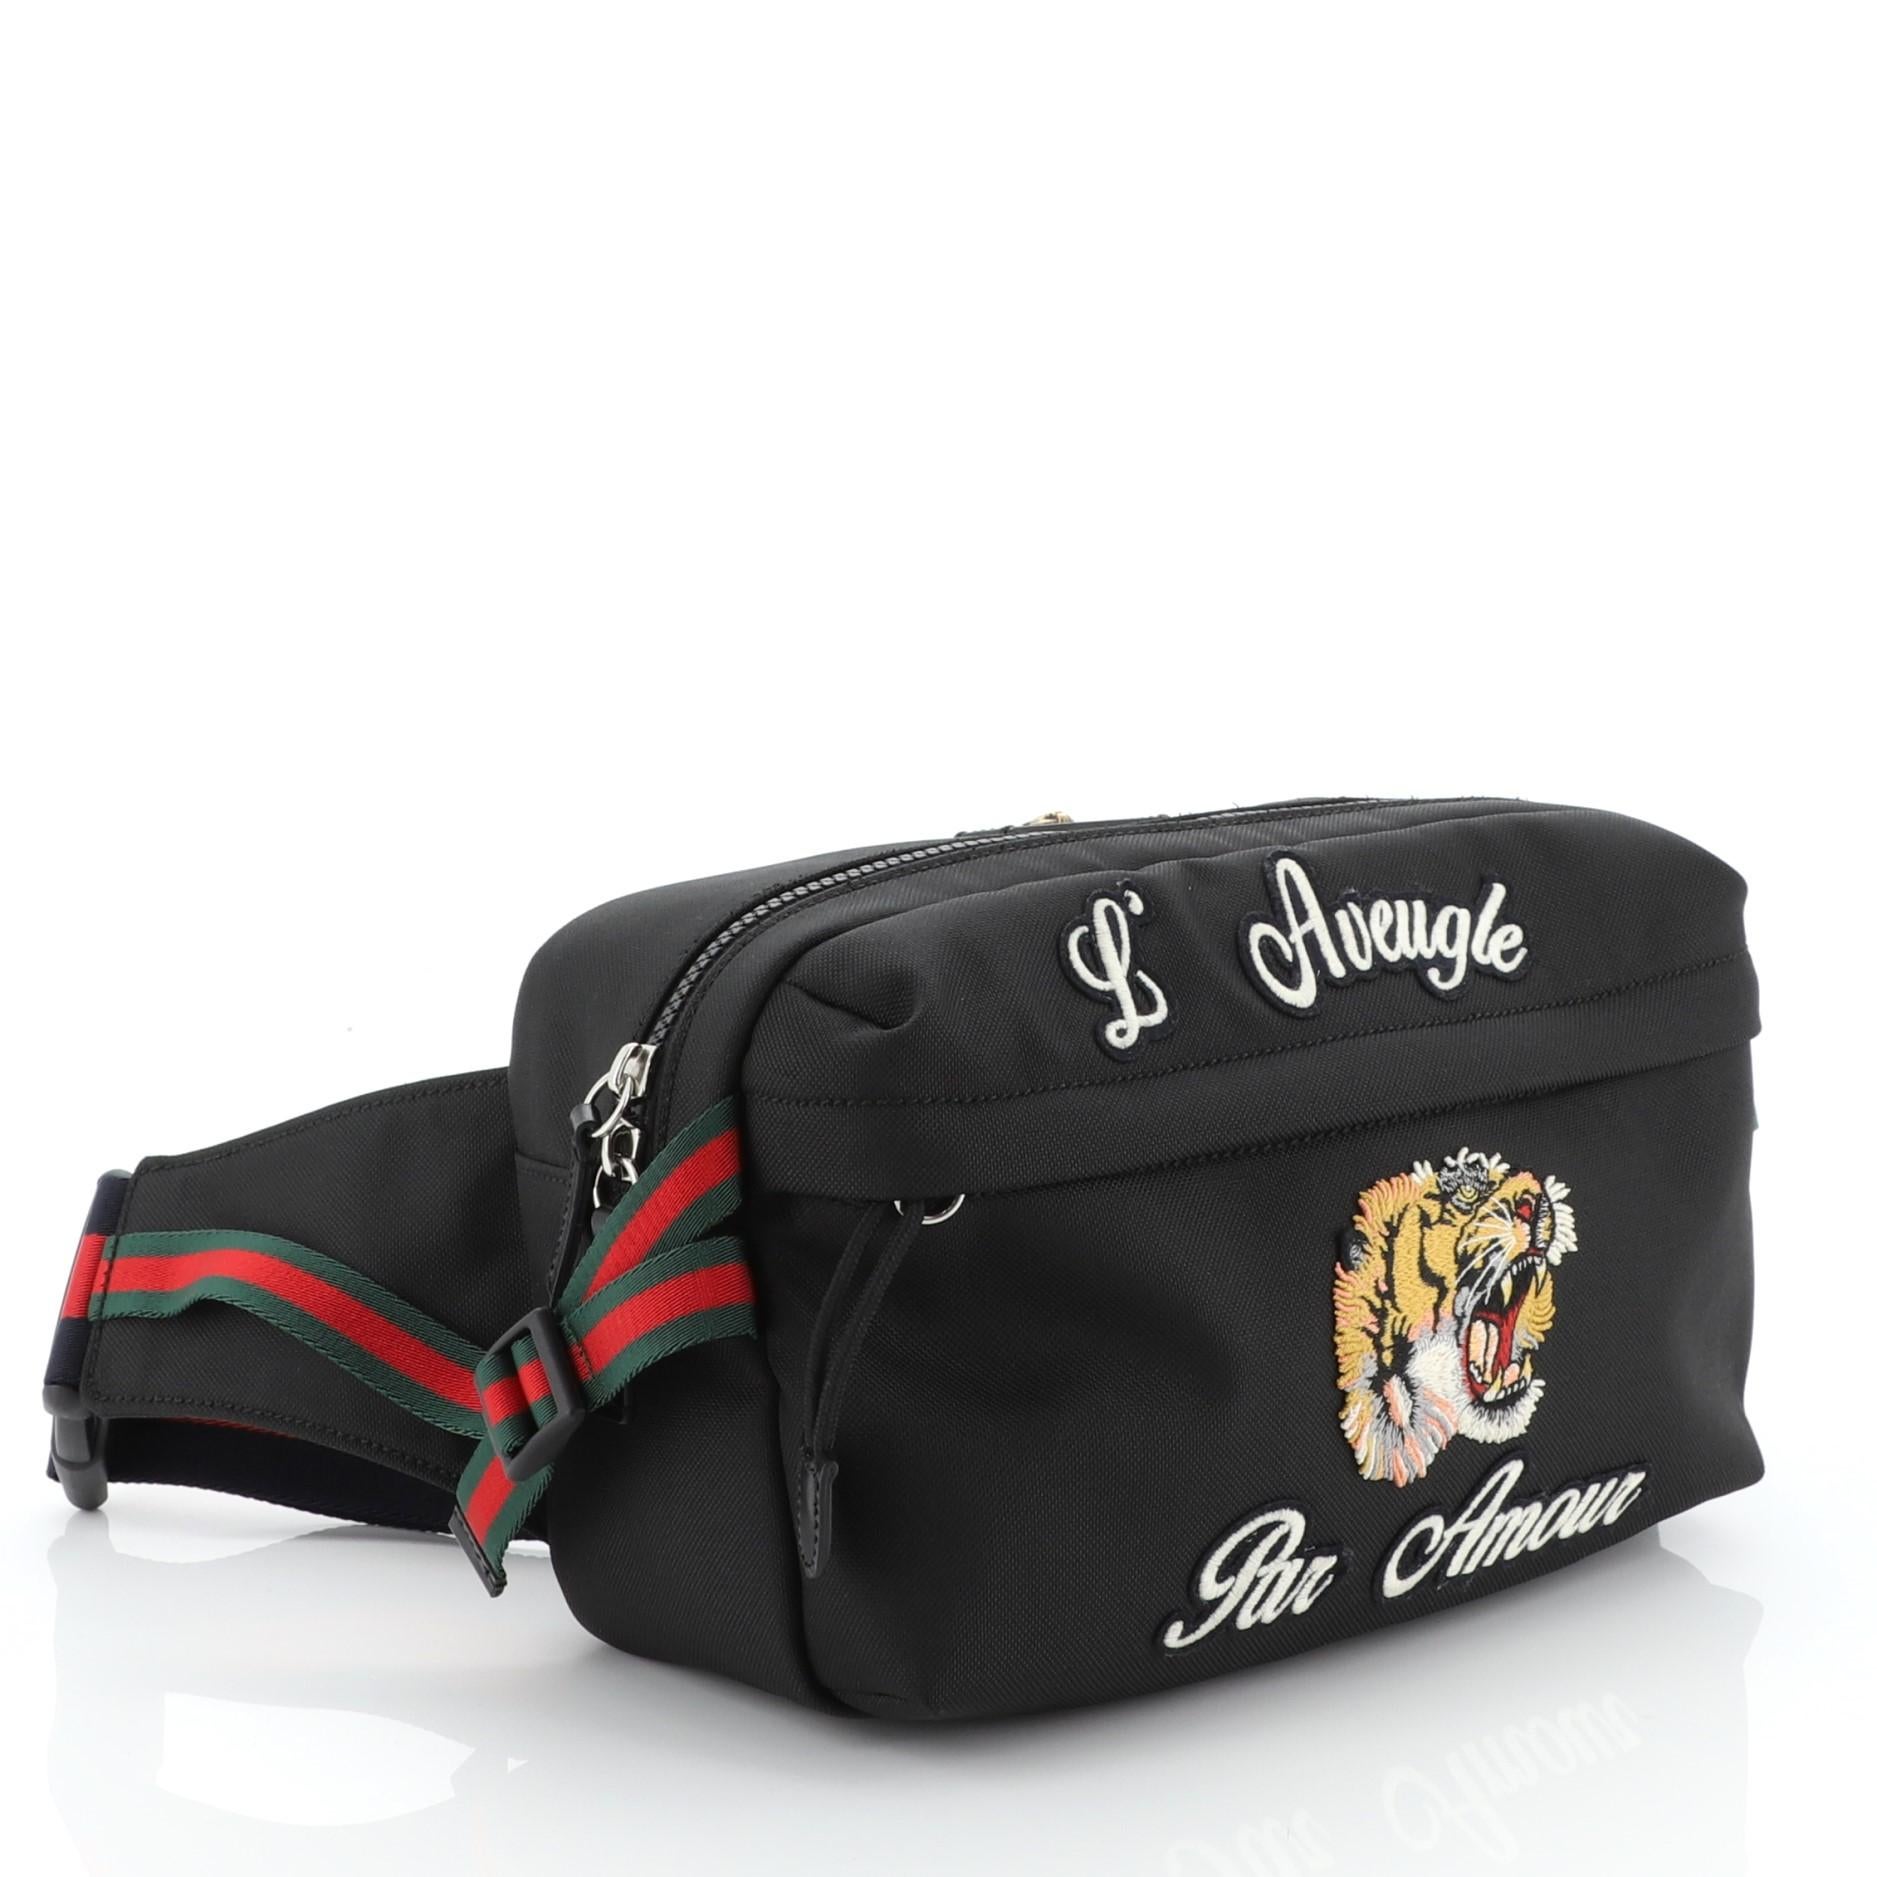 This Gucci Techpack Belt Bag Embroidered Techno Canvas is a chic piece reminiscent of 90s fashion, necessary to stay on the cutting edge. Crafted from black embroidered techno canvas, it features a web belt strap, exterior zip pocket and black-tone